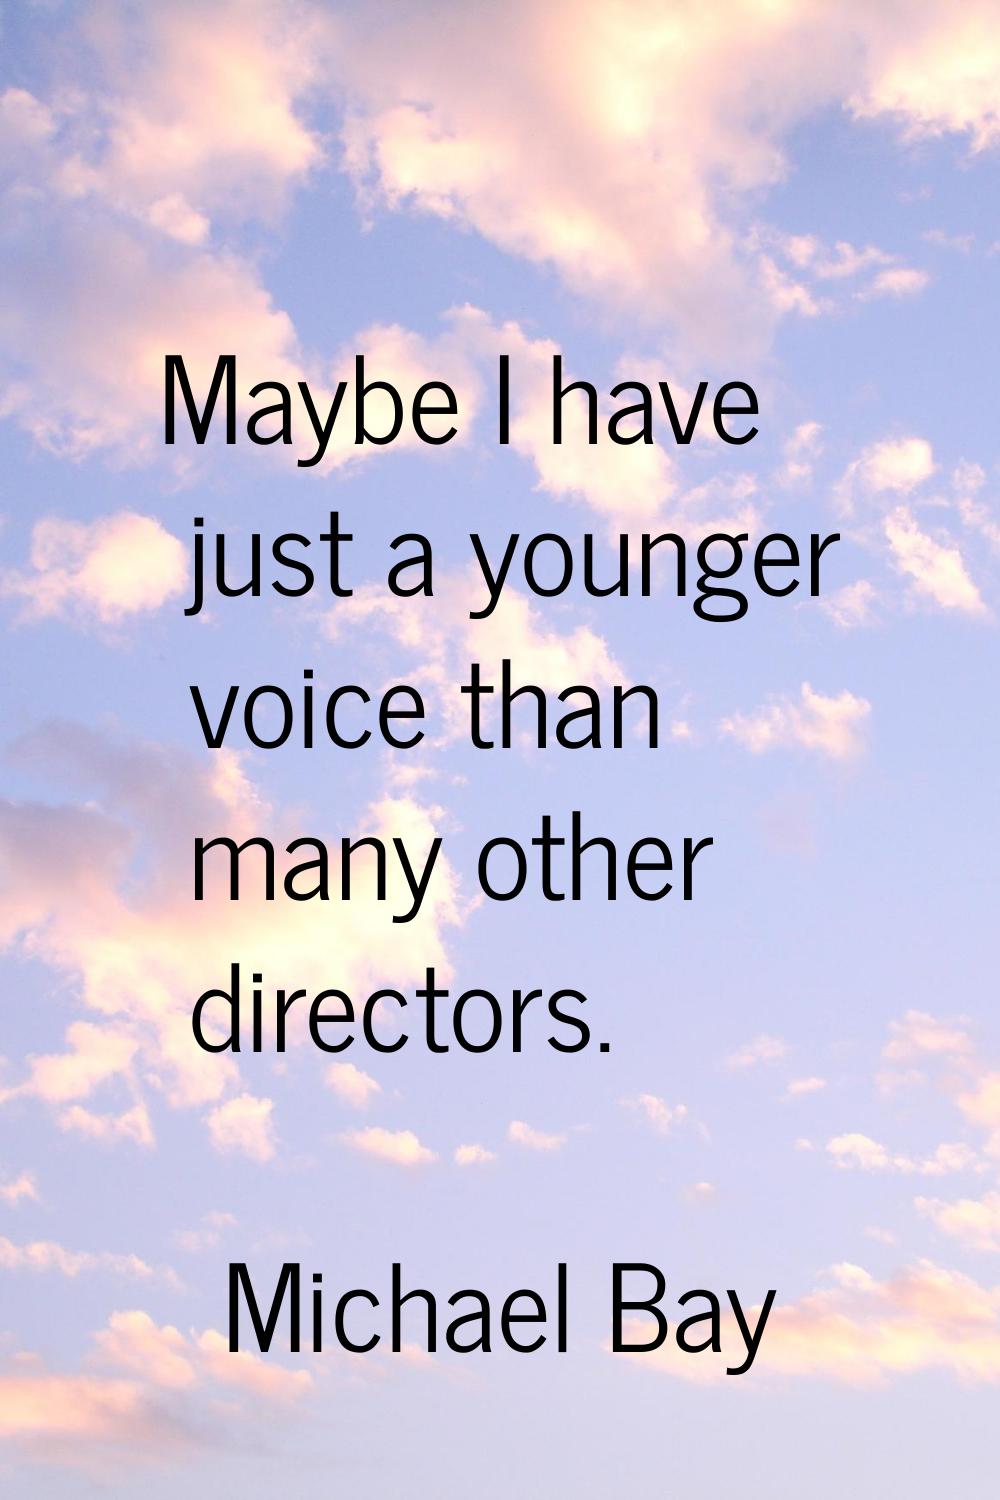 Maybe I have just a younger voice than many other directors.